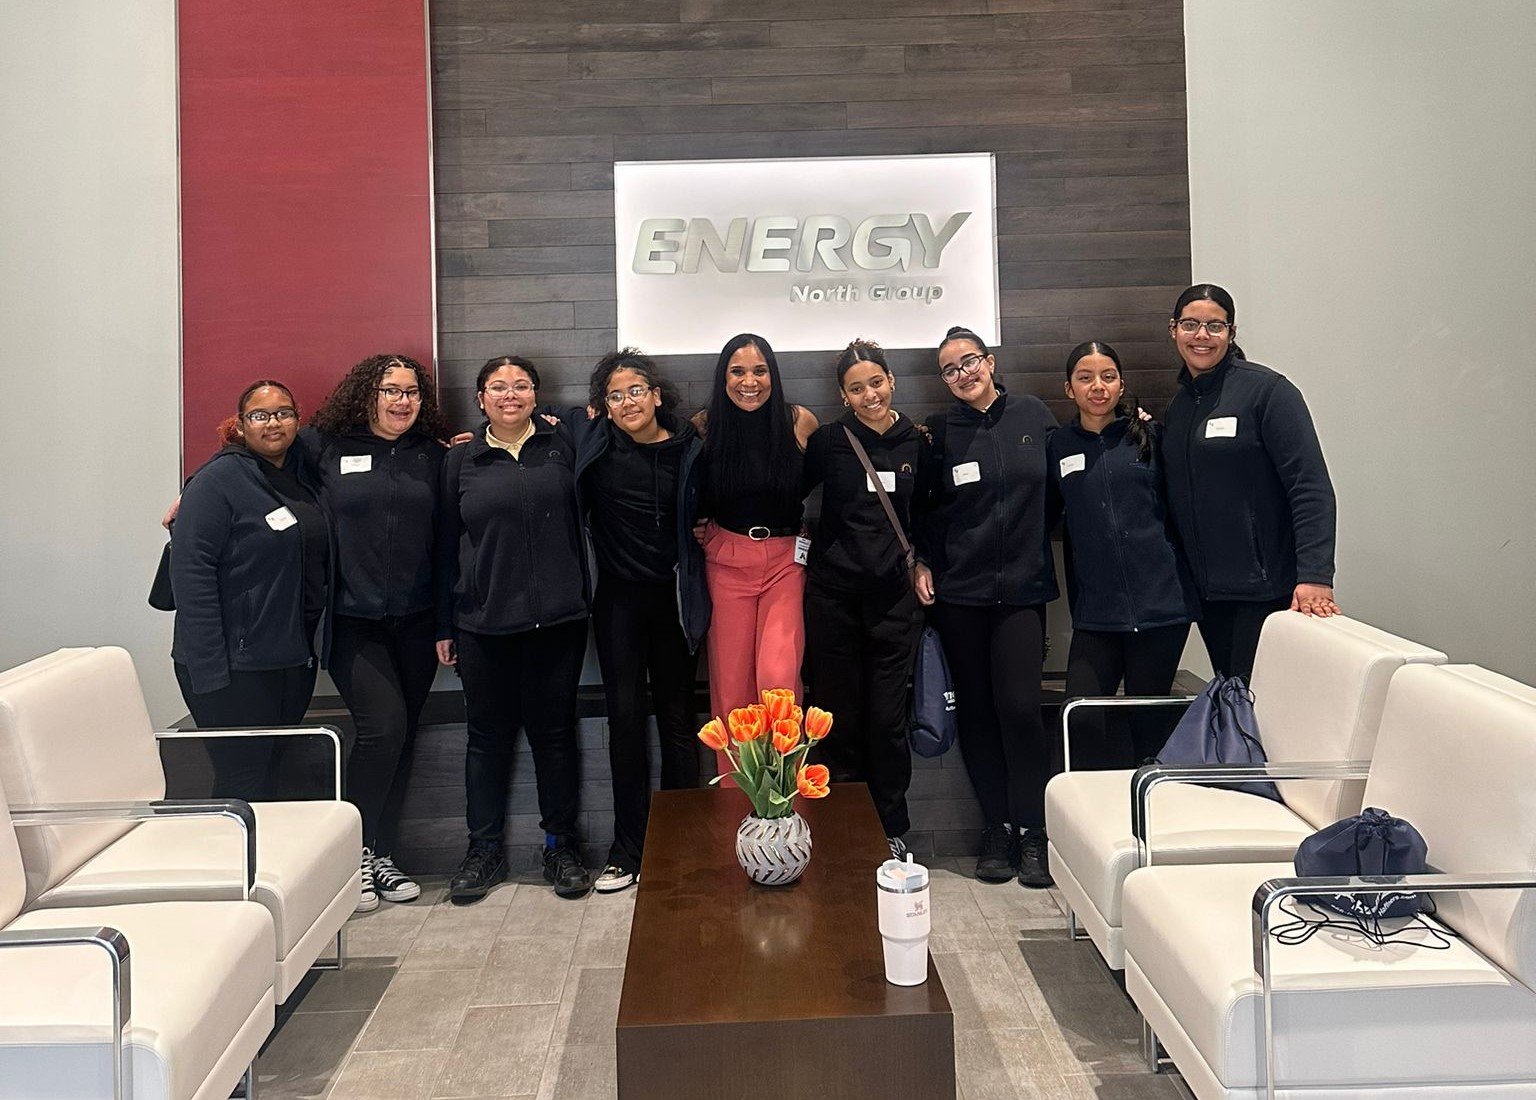 Thank you to our amazing Corporate Partners, @haffnersenergy, @jdcreditunion, and Bain Capital, for participating in our 8th Grade Career Shadow Day! Our eighth graders were fascinated learning about different career pathways, making new connections,